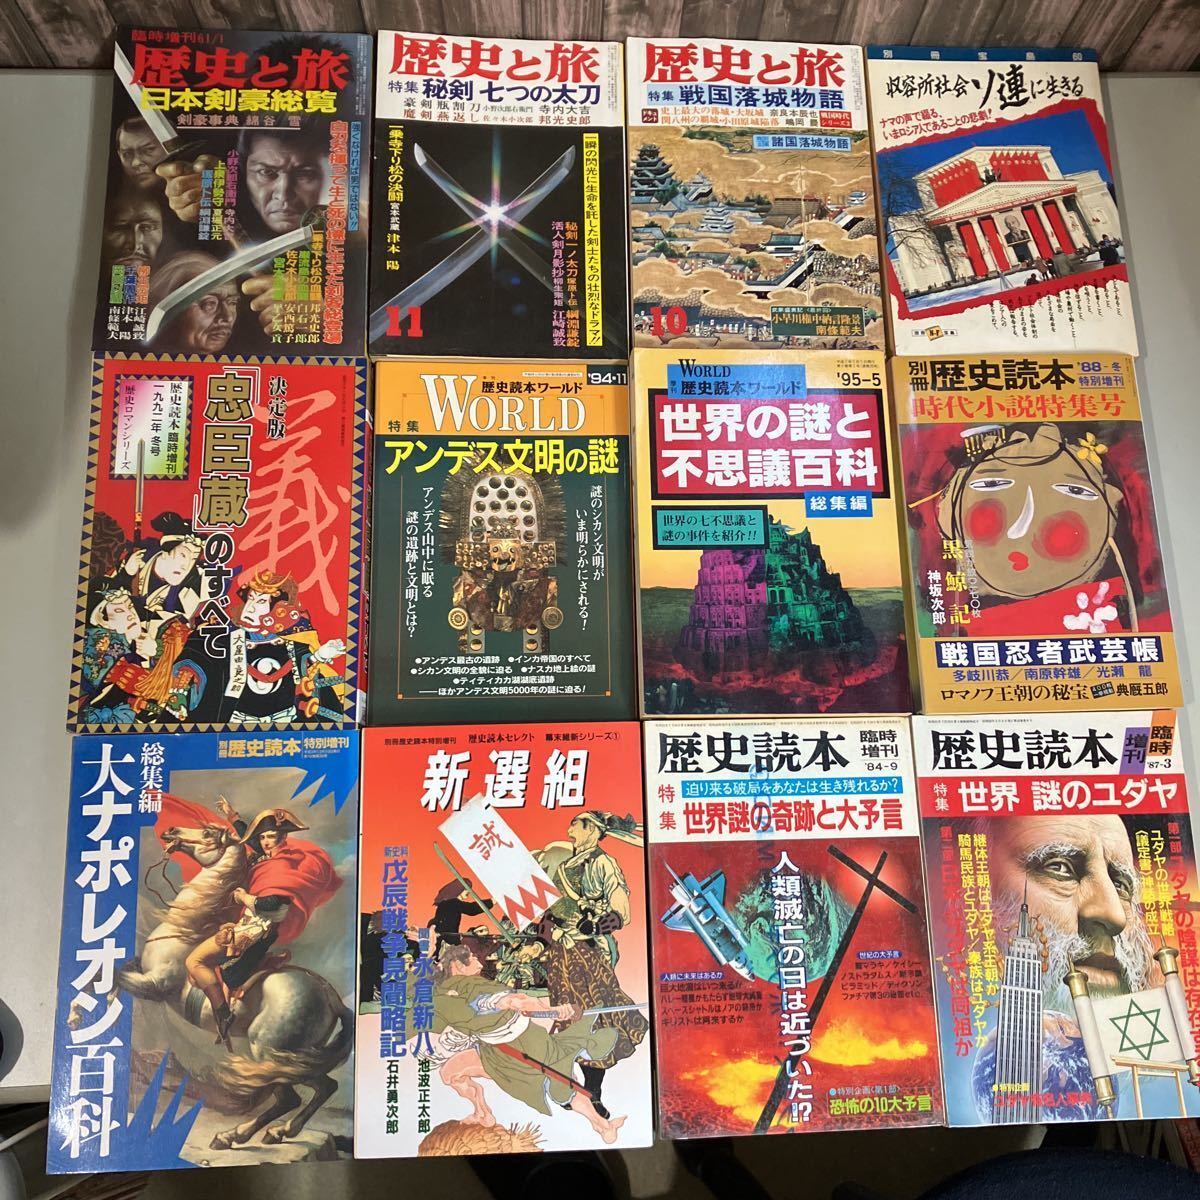 * relation book@ history reader 39 pcs. set * monthly history. ./ world. mystery series / super old fee history / super writing Akira / world. war history / war / military history / world history / history of Japan / summarize *A2943-14*